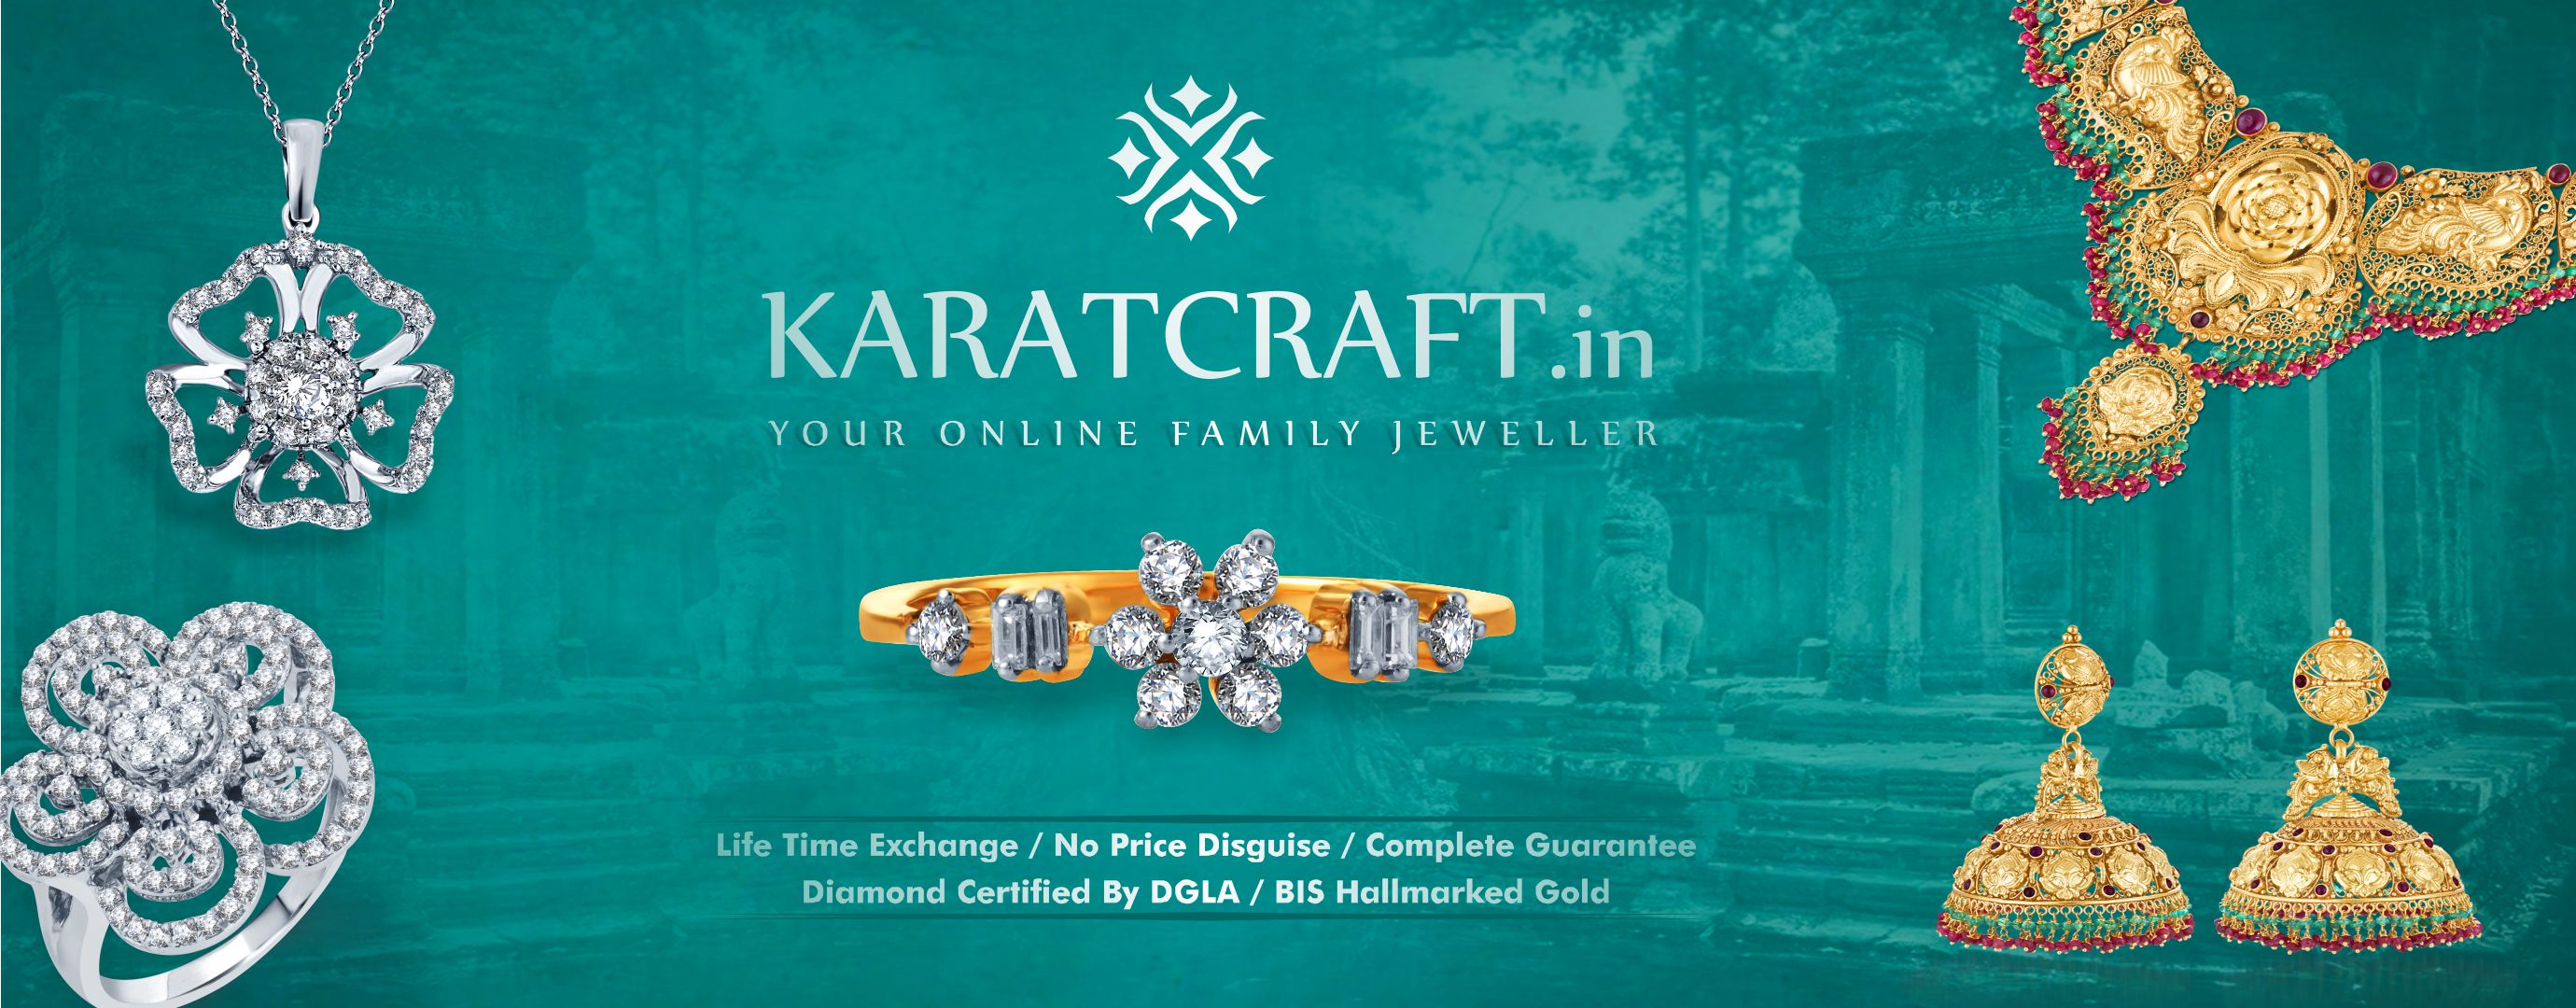 Your Family Jeweller Goes Online! 